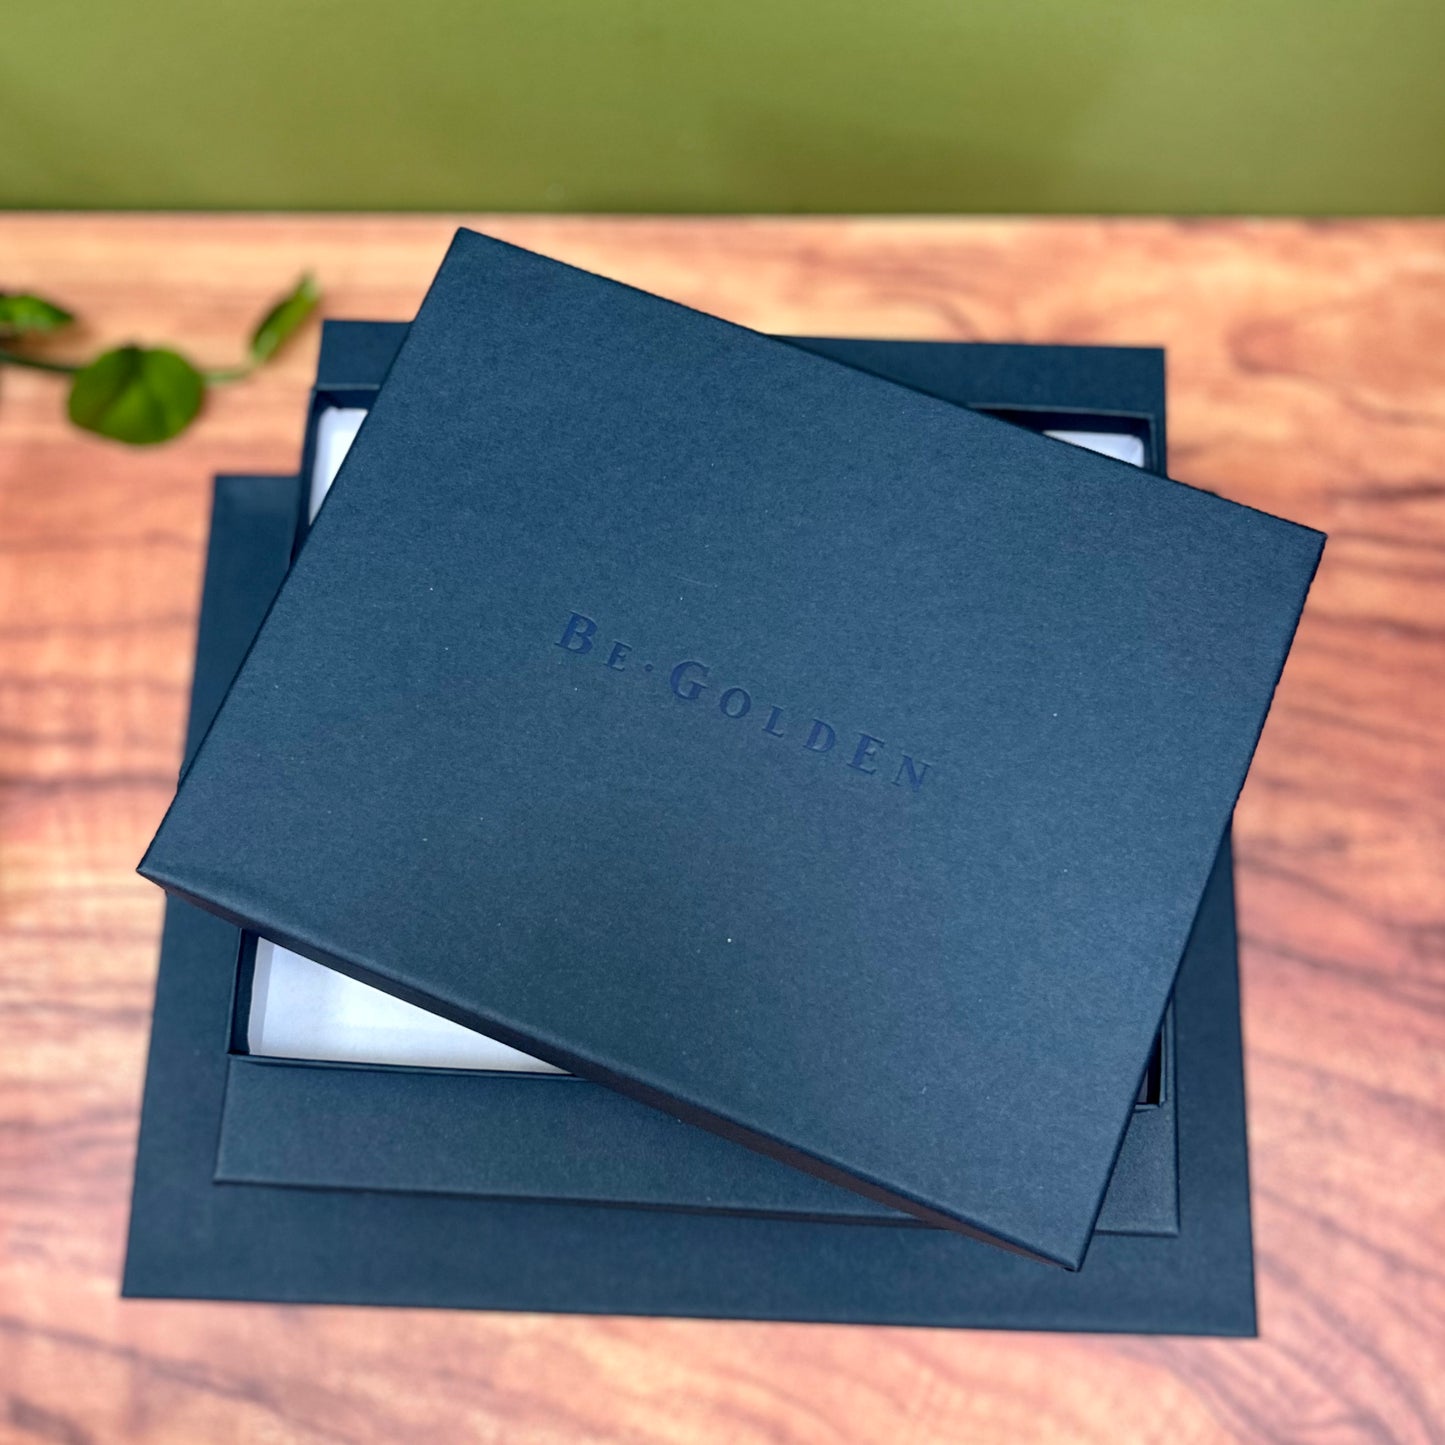 on a wooden table is a pile of blue presentation boxes - the presentation boxes are printed with the word begolden on the front 